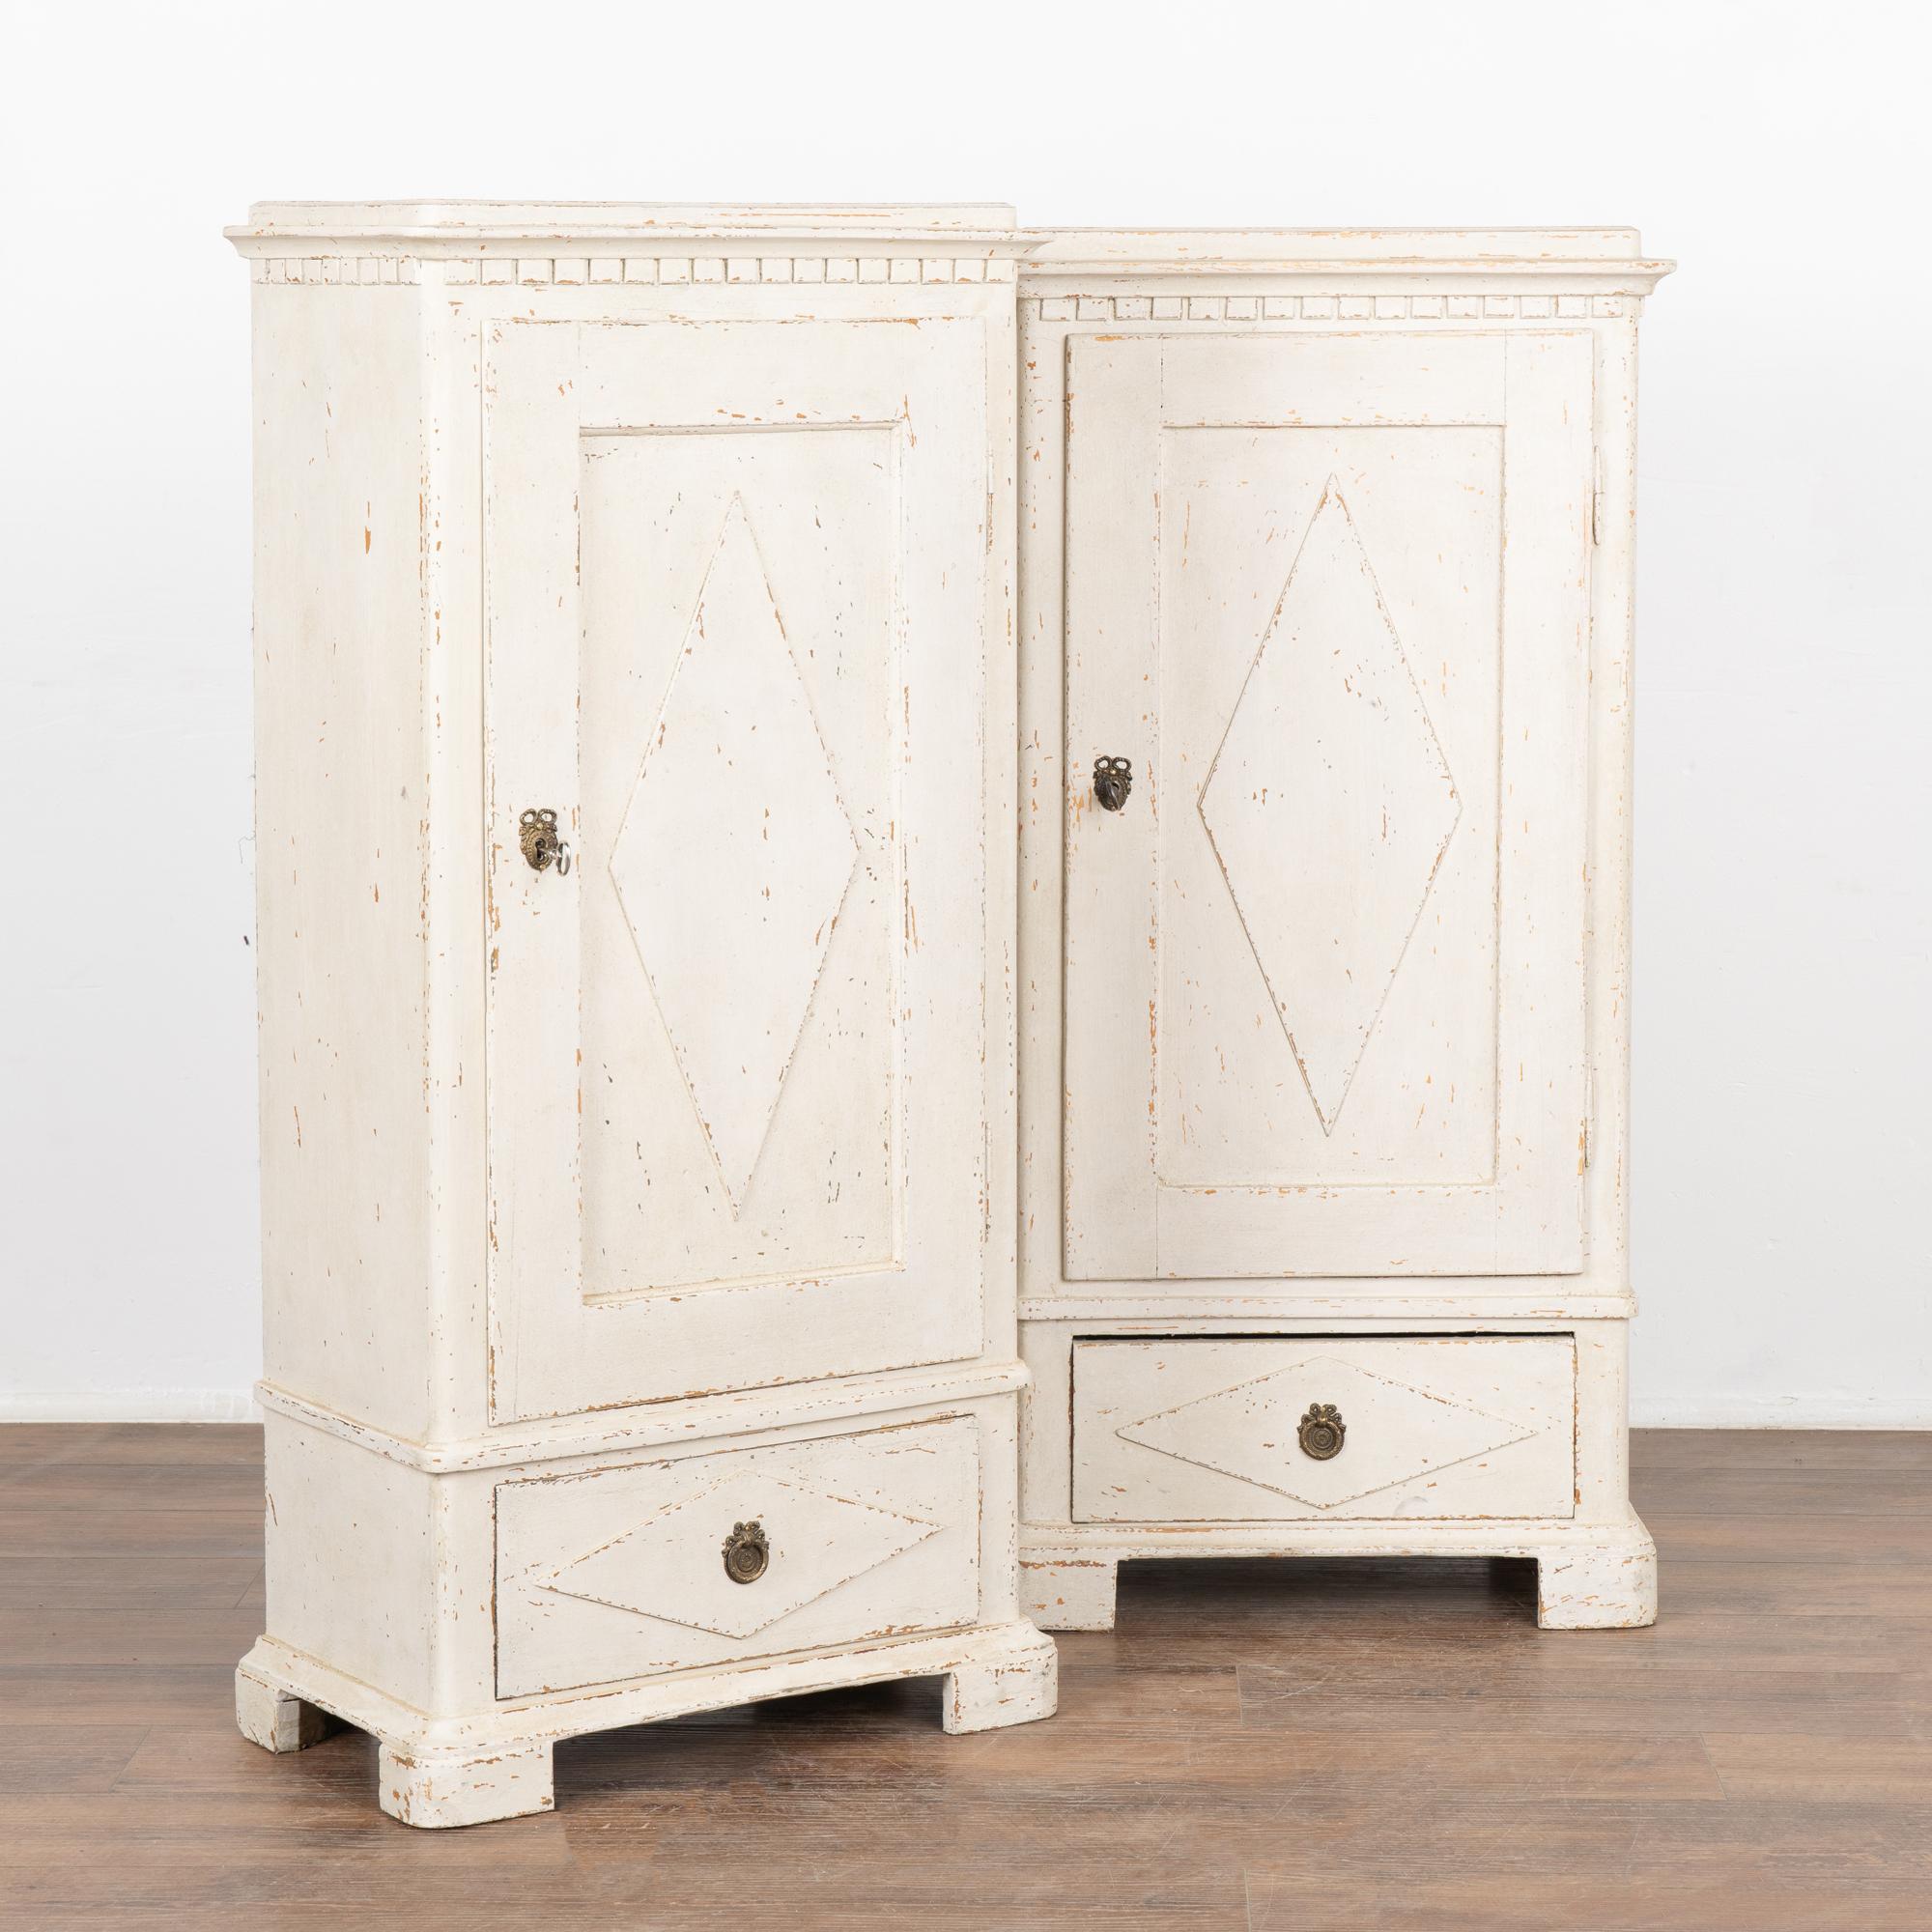 Pair, Gustavian narrow column pine cabinets with traditional diamond motif, dentil molding and lower drawer.
Newer, professionally applied white painted finish has been gently distressed fitting the age and grace of these cabinets.
Made of pine,